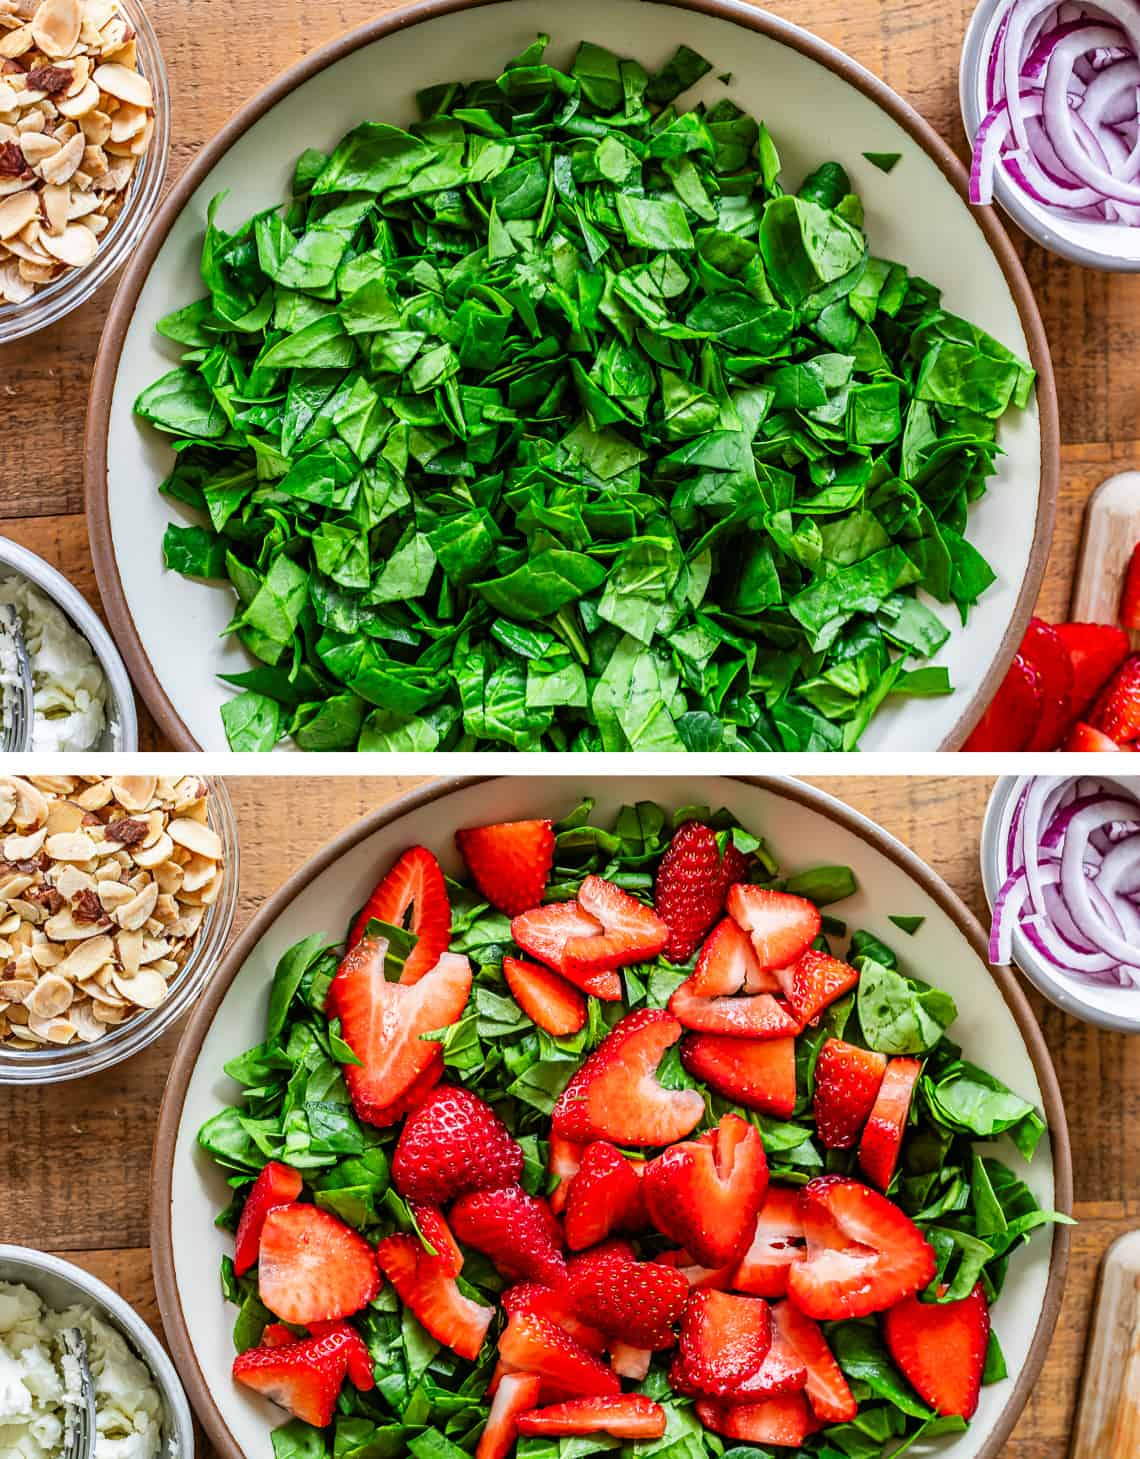 top chopped spinach leaves in serving bowl, bottom sliced strawberries added on top of spinach.